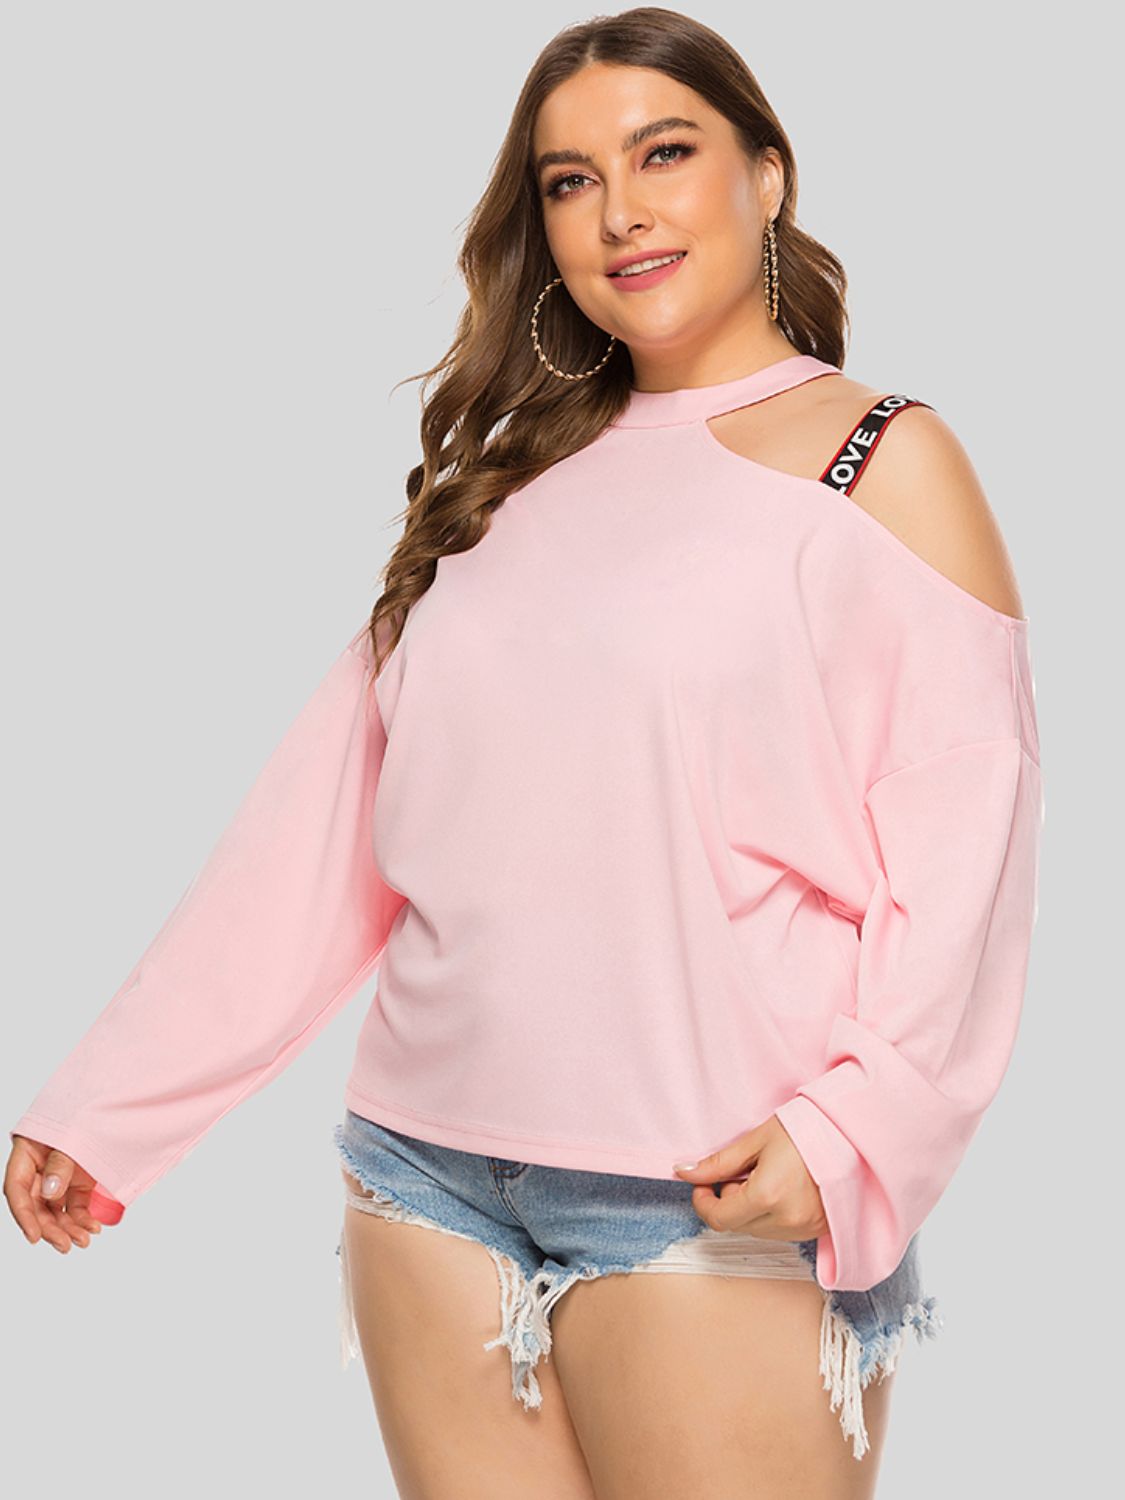 Plus Size Resort Vacation Blouse